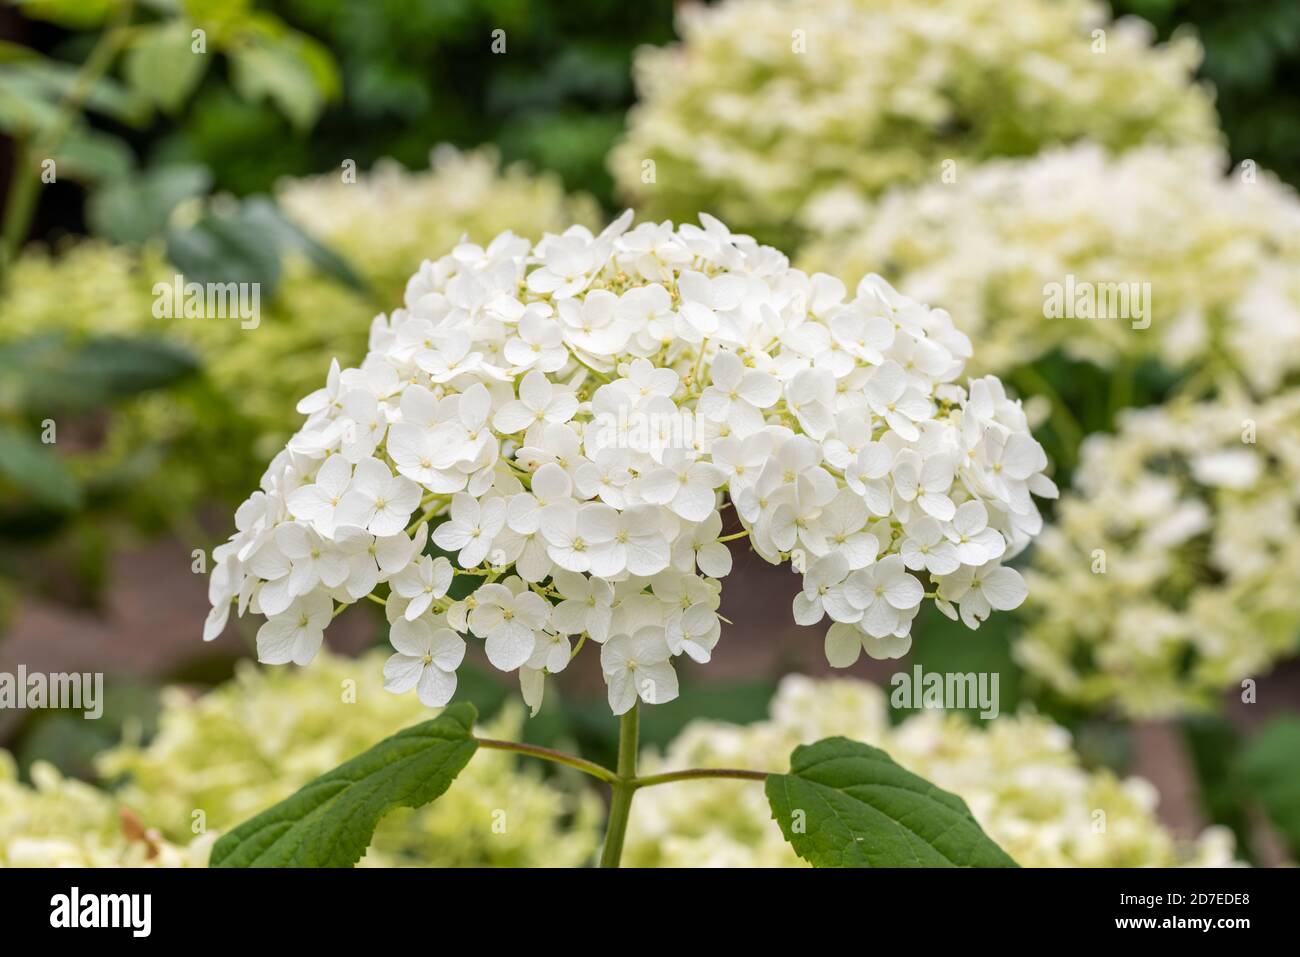 Close up of single bloom of pure white mophead Hydrangea 'Annabelle'. Leaves and Hydrangea blossom blurred in the background. Stock Photo